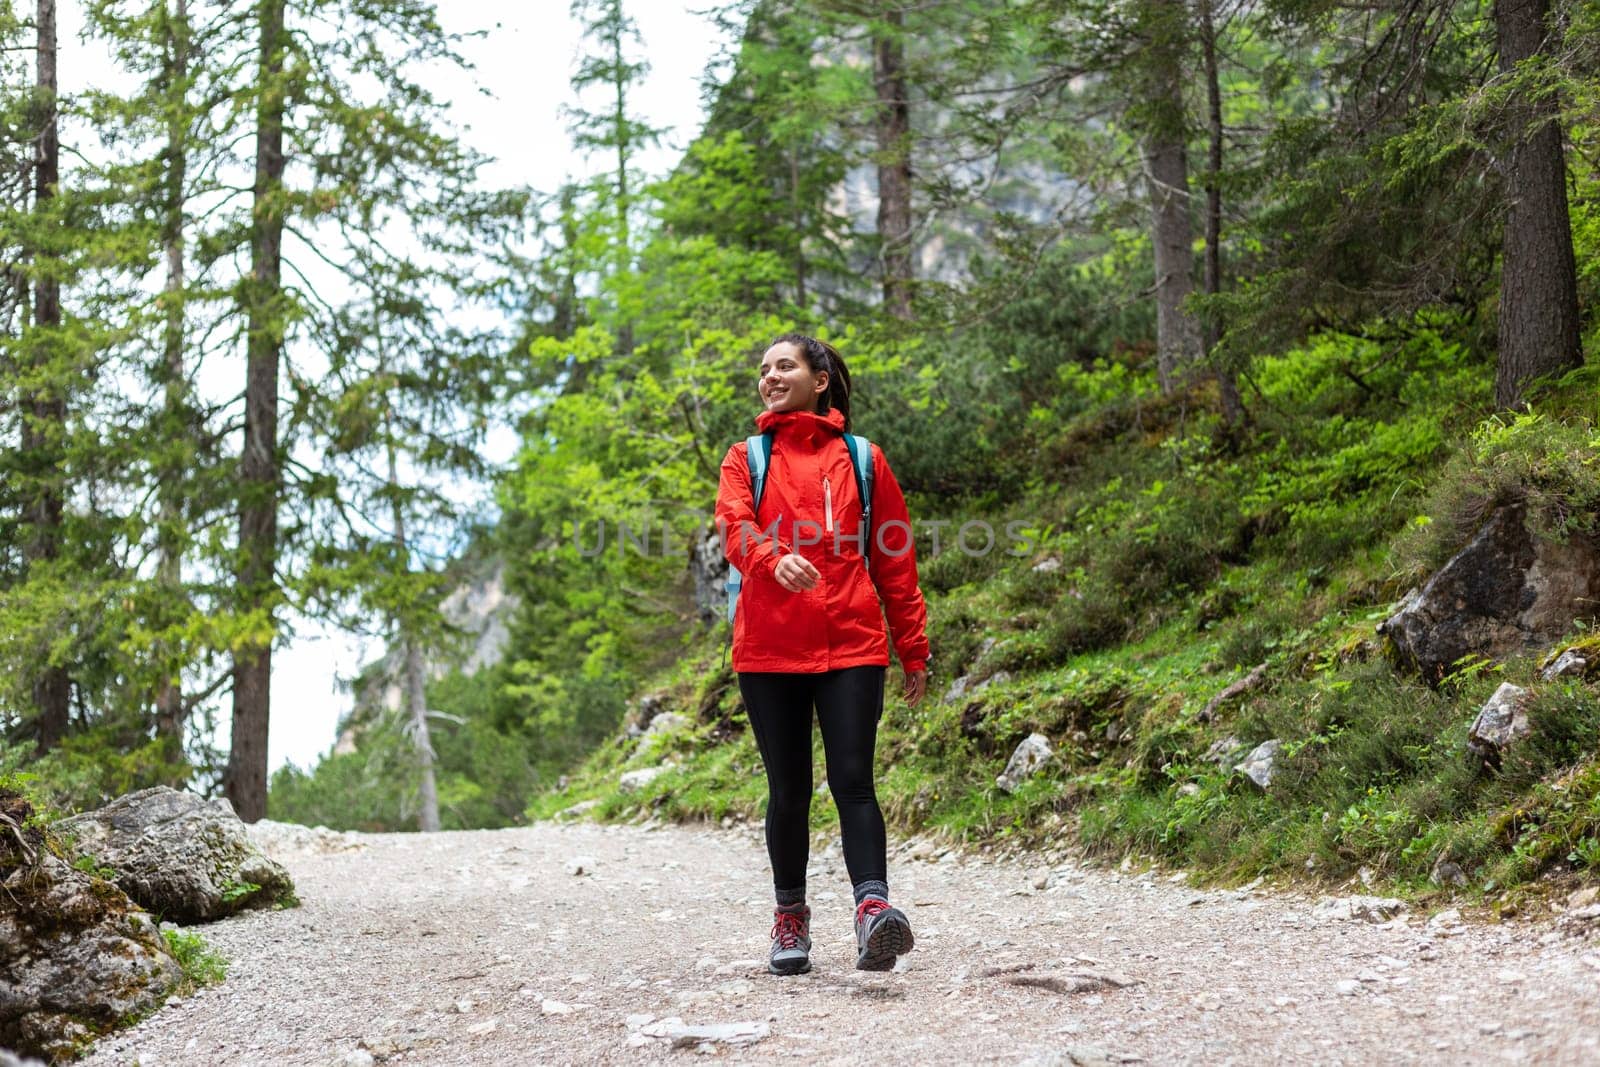 Fearless young woman hiking cheerfully alone in the mountain forest in a red raincoat looking towards the side.